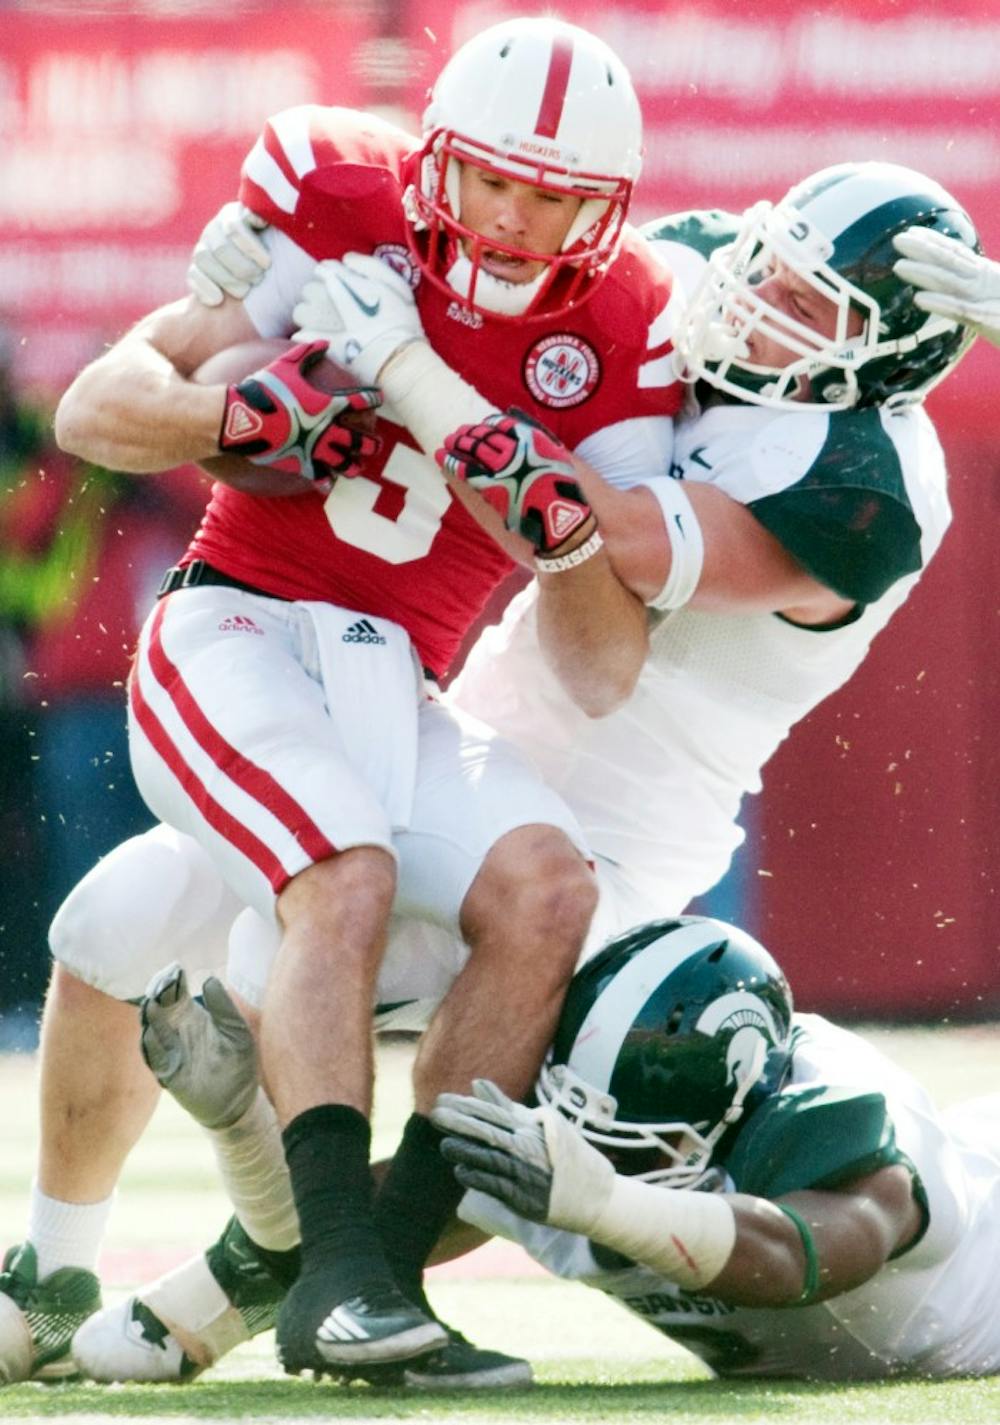 Sophomore linebacker Max Bullough tackles Nebraska quarterback Taylor Martinez on a run. The Cornhuskers ran for 190 yards and defeated the Spartans, 24-3, on Saturday afternoon at Memorial Stadium in Lincoln, Neb. Josh Radtke/The State News